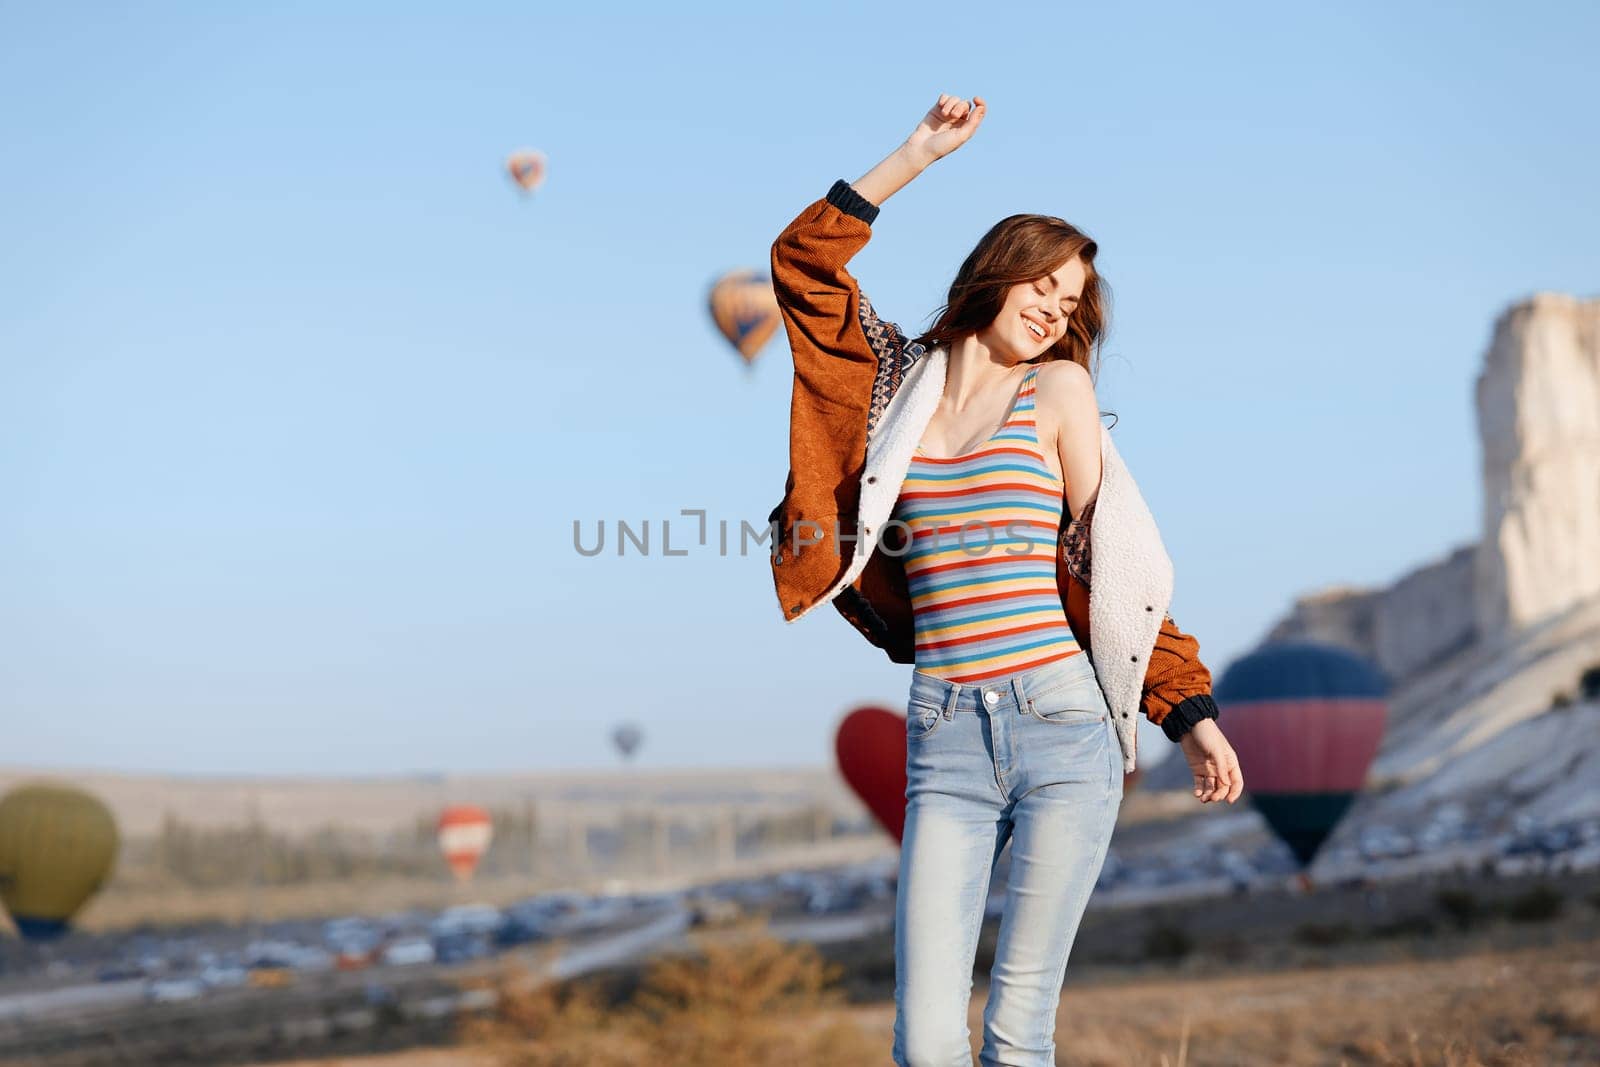 joyful woman leaping with striped shirt as colorful hot air balloons float in the sky